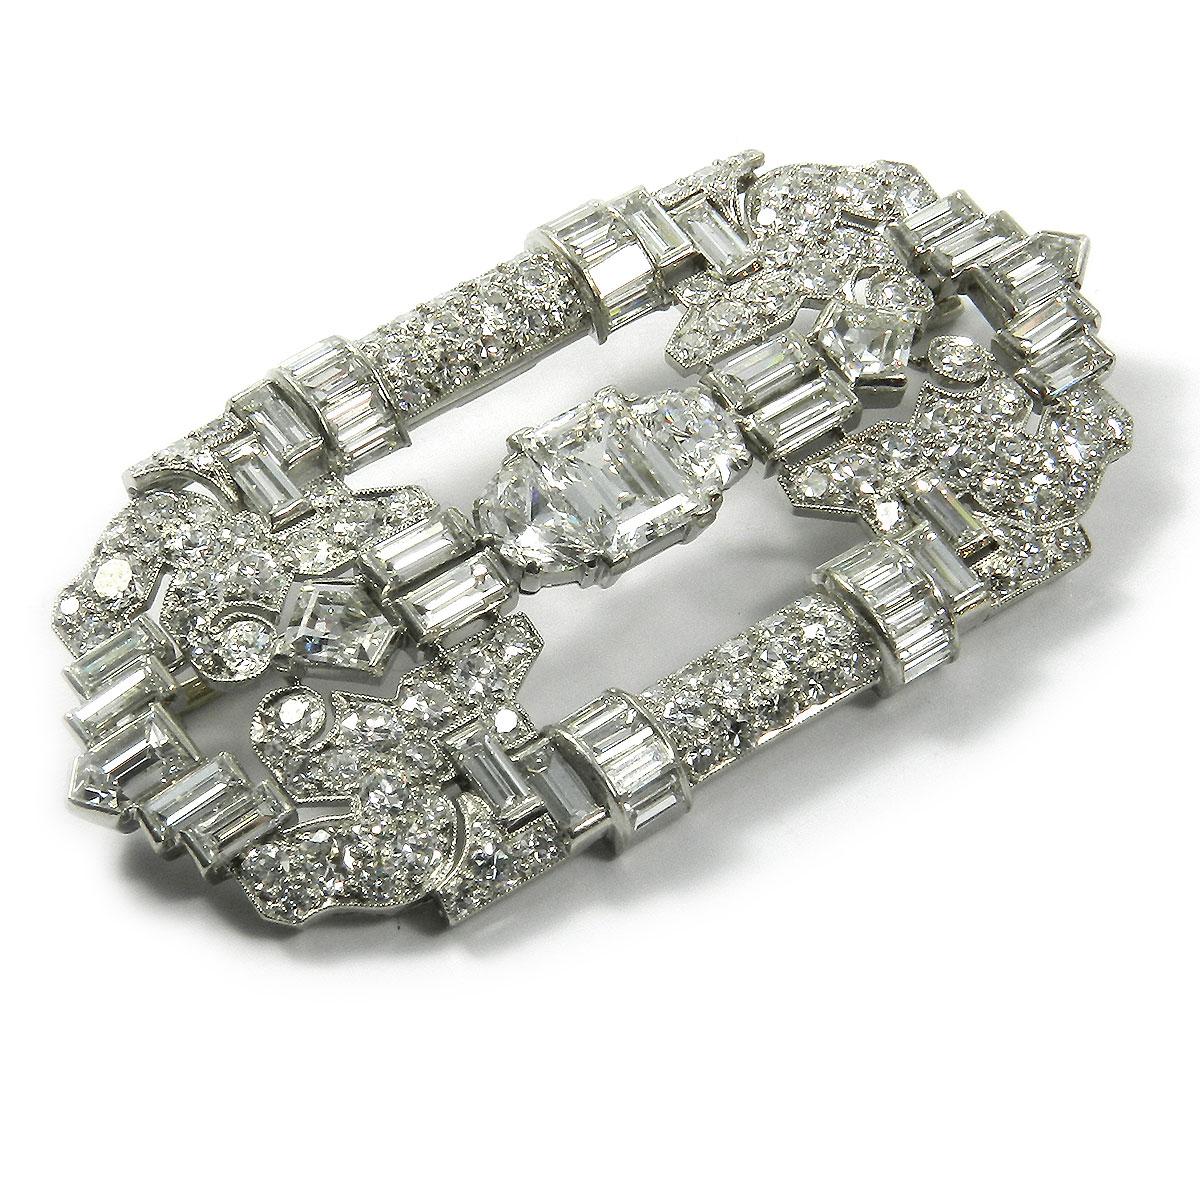 Art Deco 8.43 carat diamond and platinum Brooch circa 1920

This decorative brooch is geometrically designed with a central baguette diamond of 1.19 carat, surrounded by 162 diamonds in baguette, crescent and transition cut with a total of 7.24